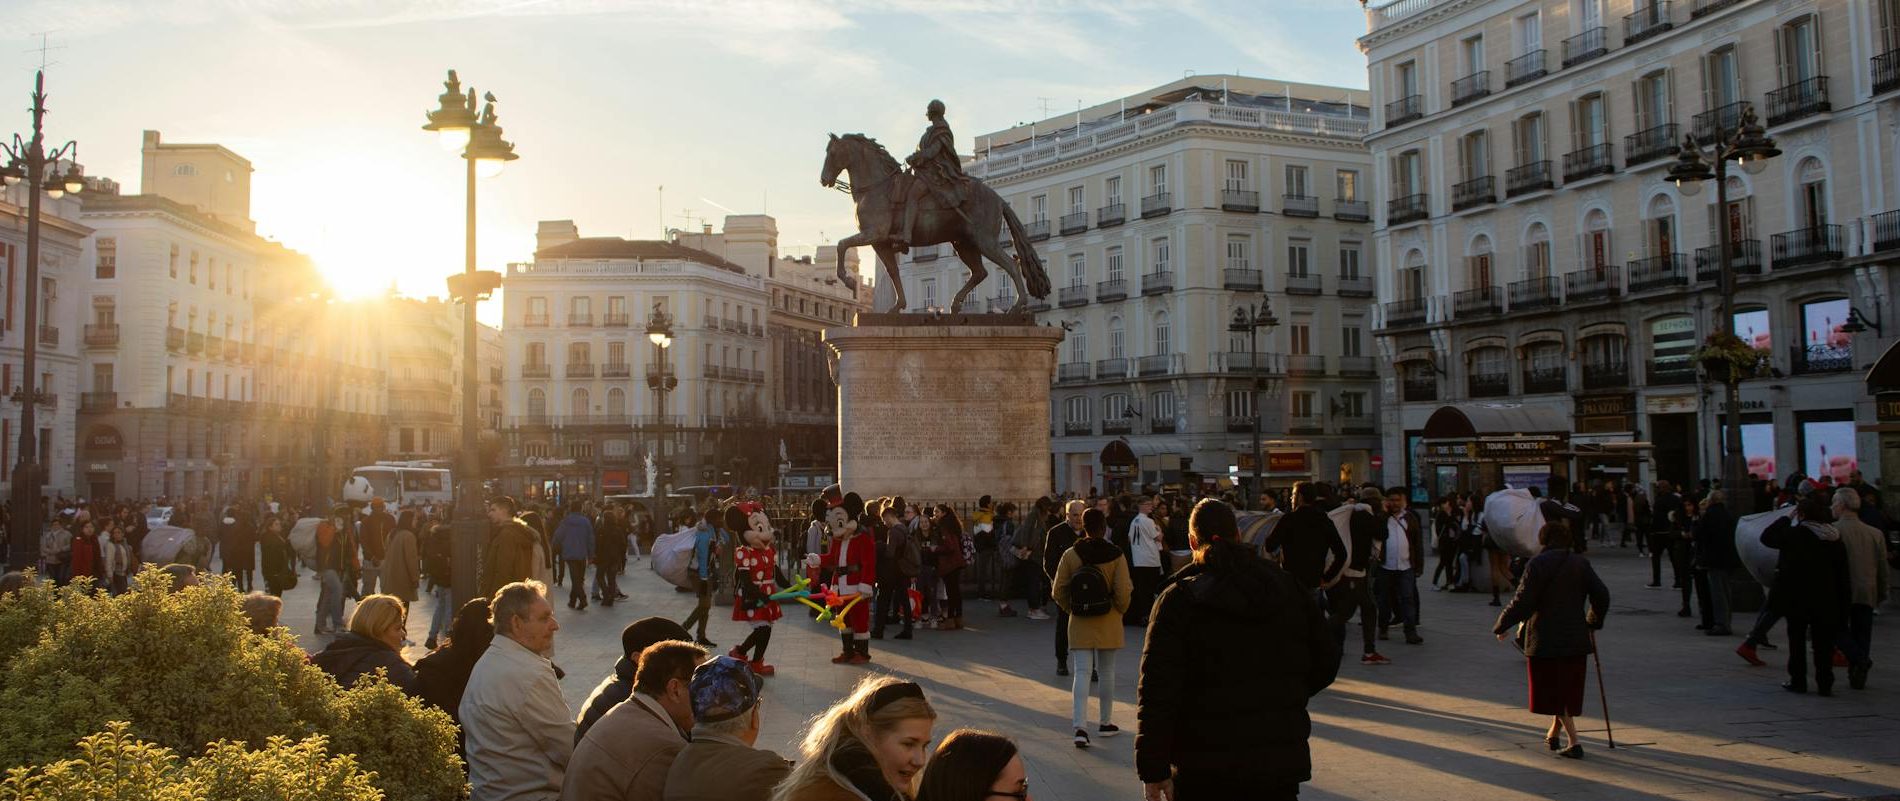 Puerta del sol Madrid - Which EU Citizenship is the Easiest to Get